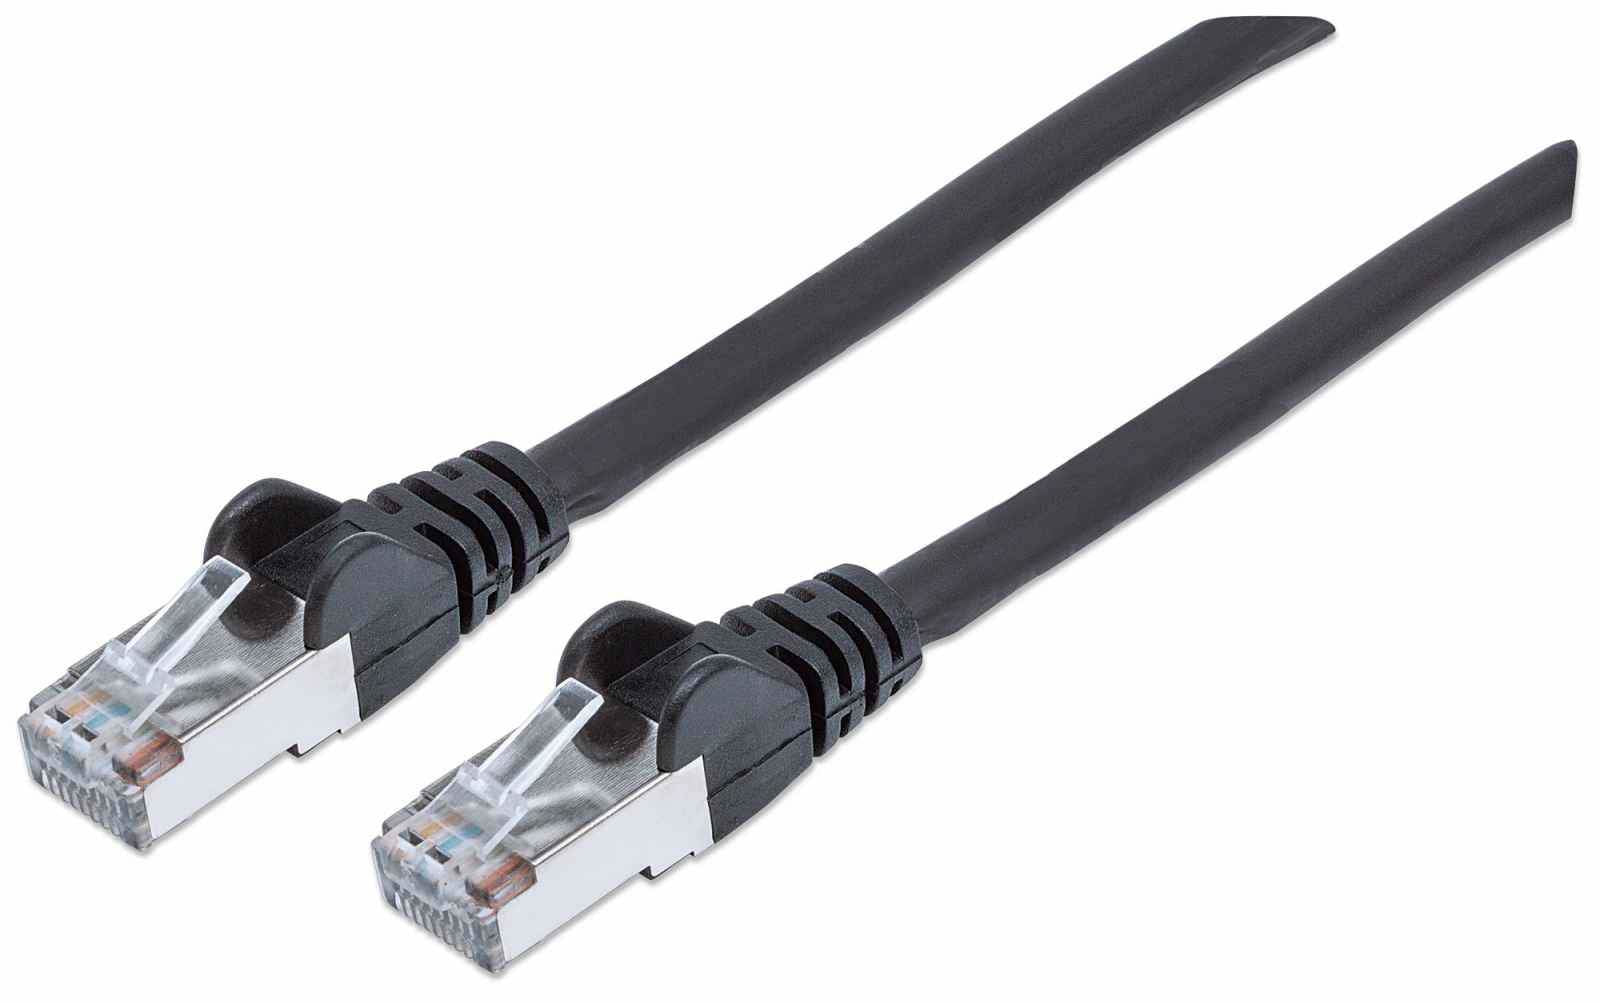 Intellinet Network Patch Cable, Cat7 Cable/Cat6A Plugs, 2m, Black, Copper, S/FTP, LSOH / LSZH, PVC, RJ45, Gold Plated Contacts, Snagless, Booted, Lifetime Warranty, Polybag